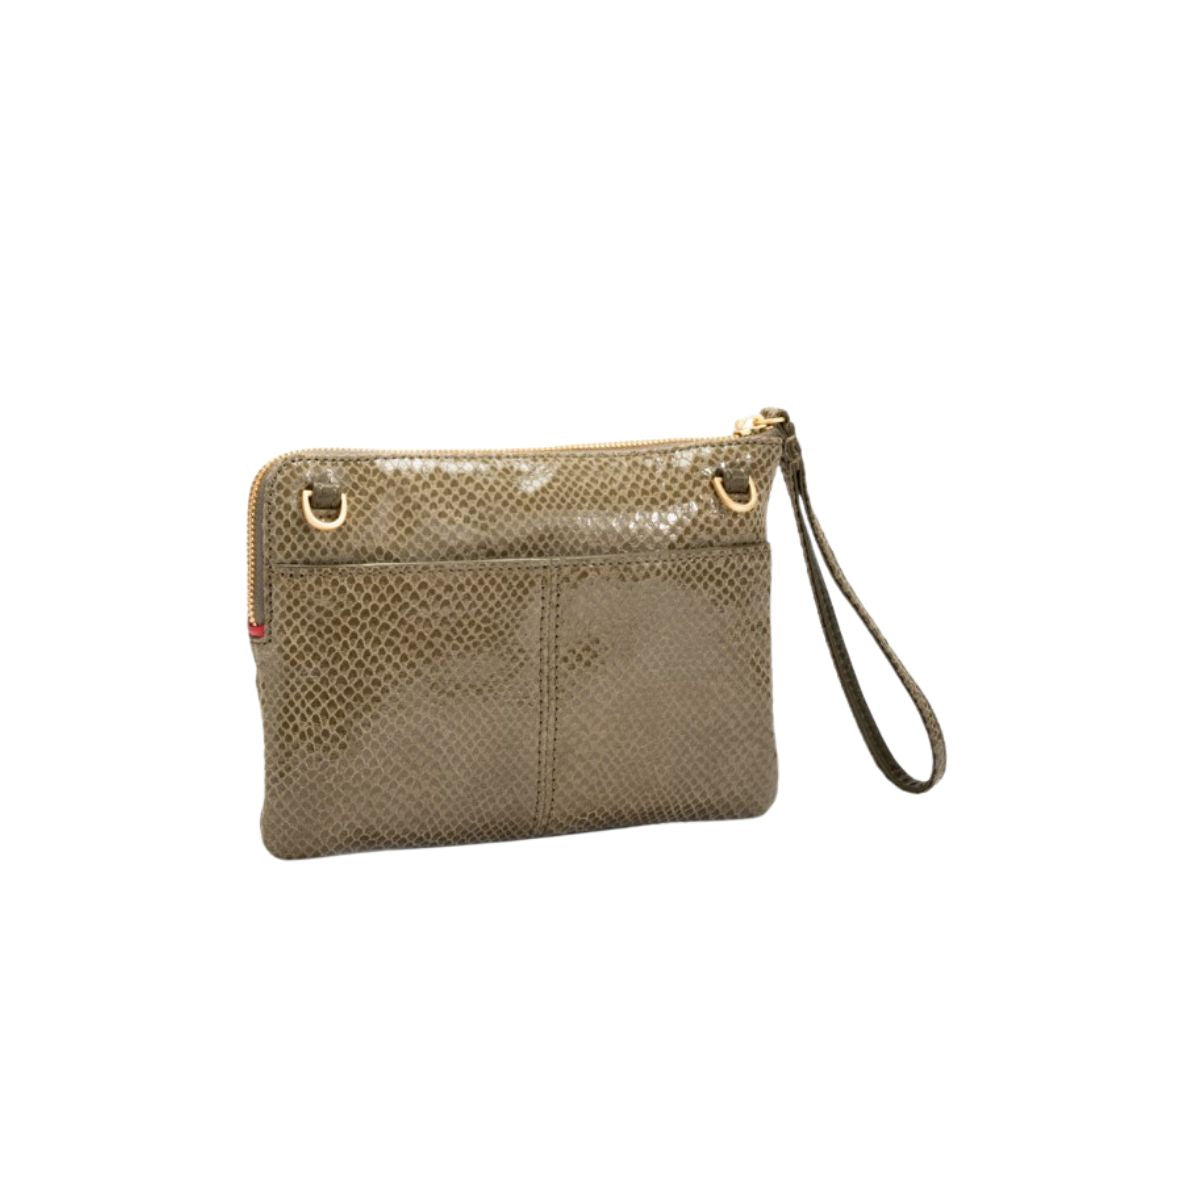 Hammitt Nash Small Clutch in Bistro Green Snake & Brushed Gold